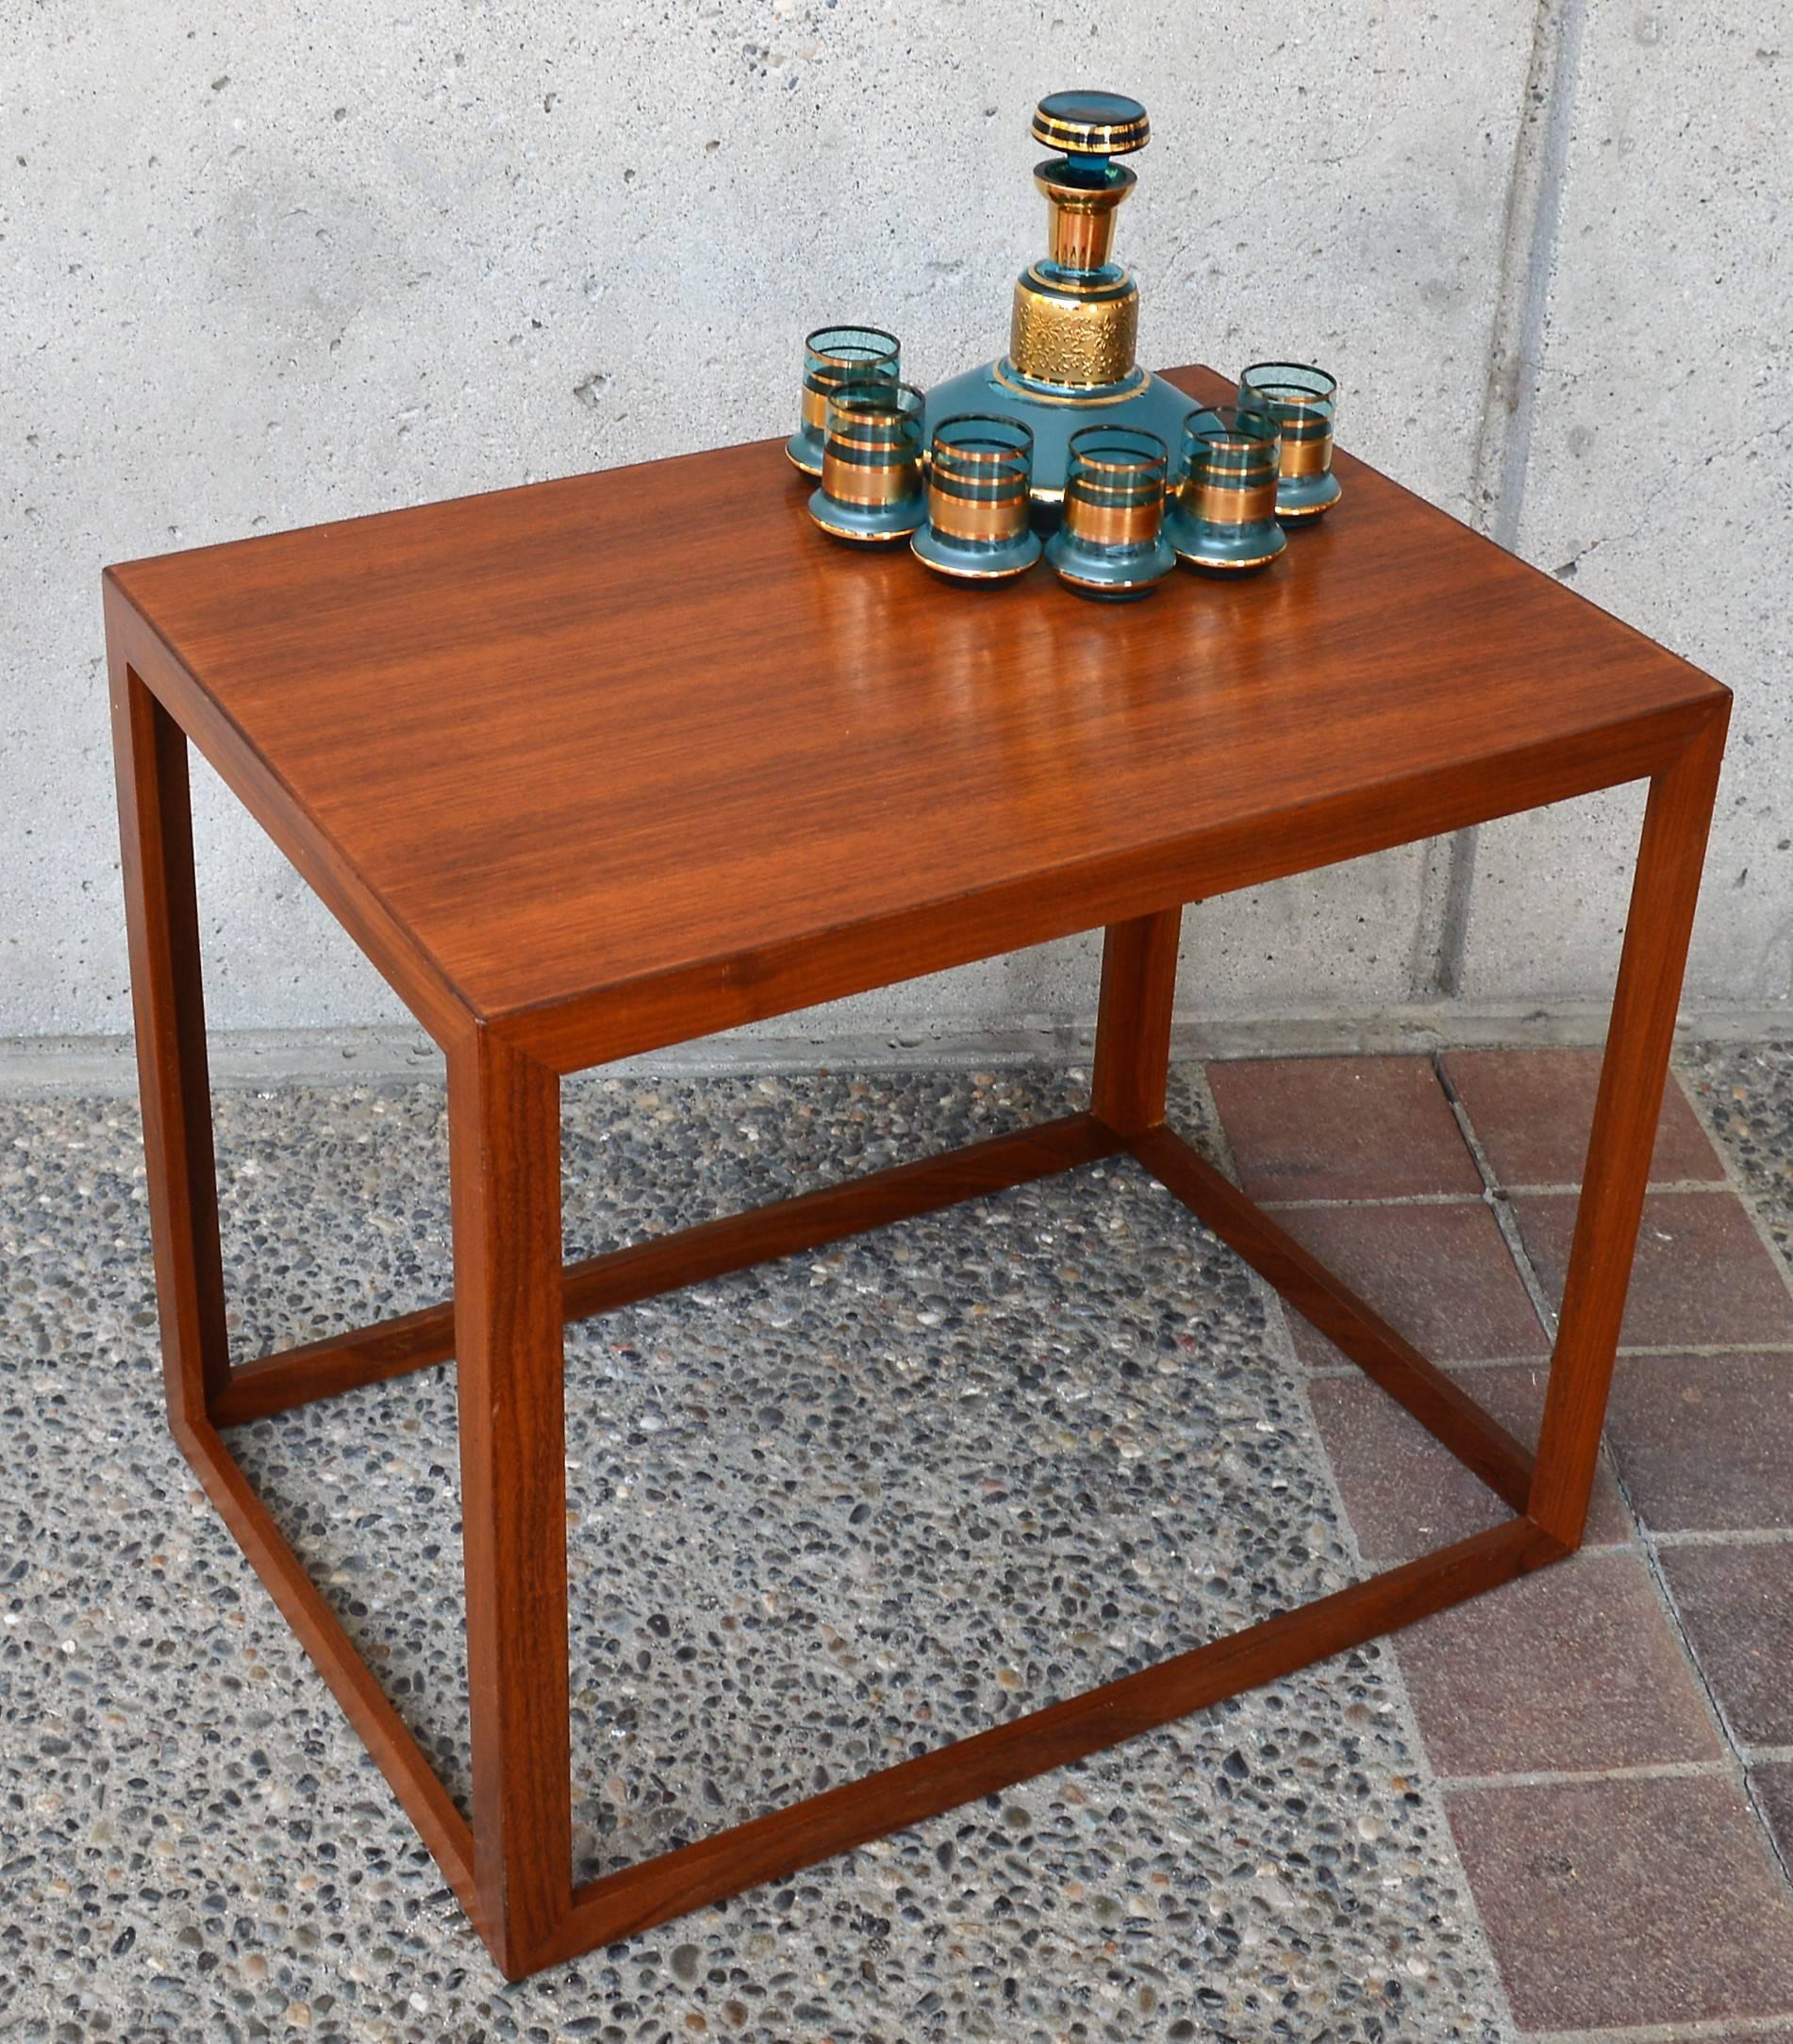 This fabulous Danish modern teak and mahogany open airy table reminds me of when I first learned how to draw a 3D cube! Beautiful grain, design and mitered corner details - it's perfect as a large side table or a smaller coffee table. In gorgeous